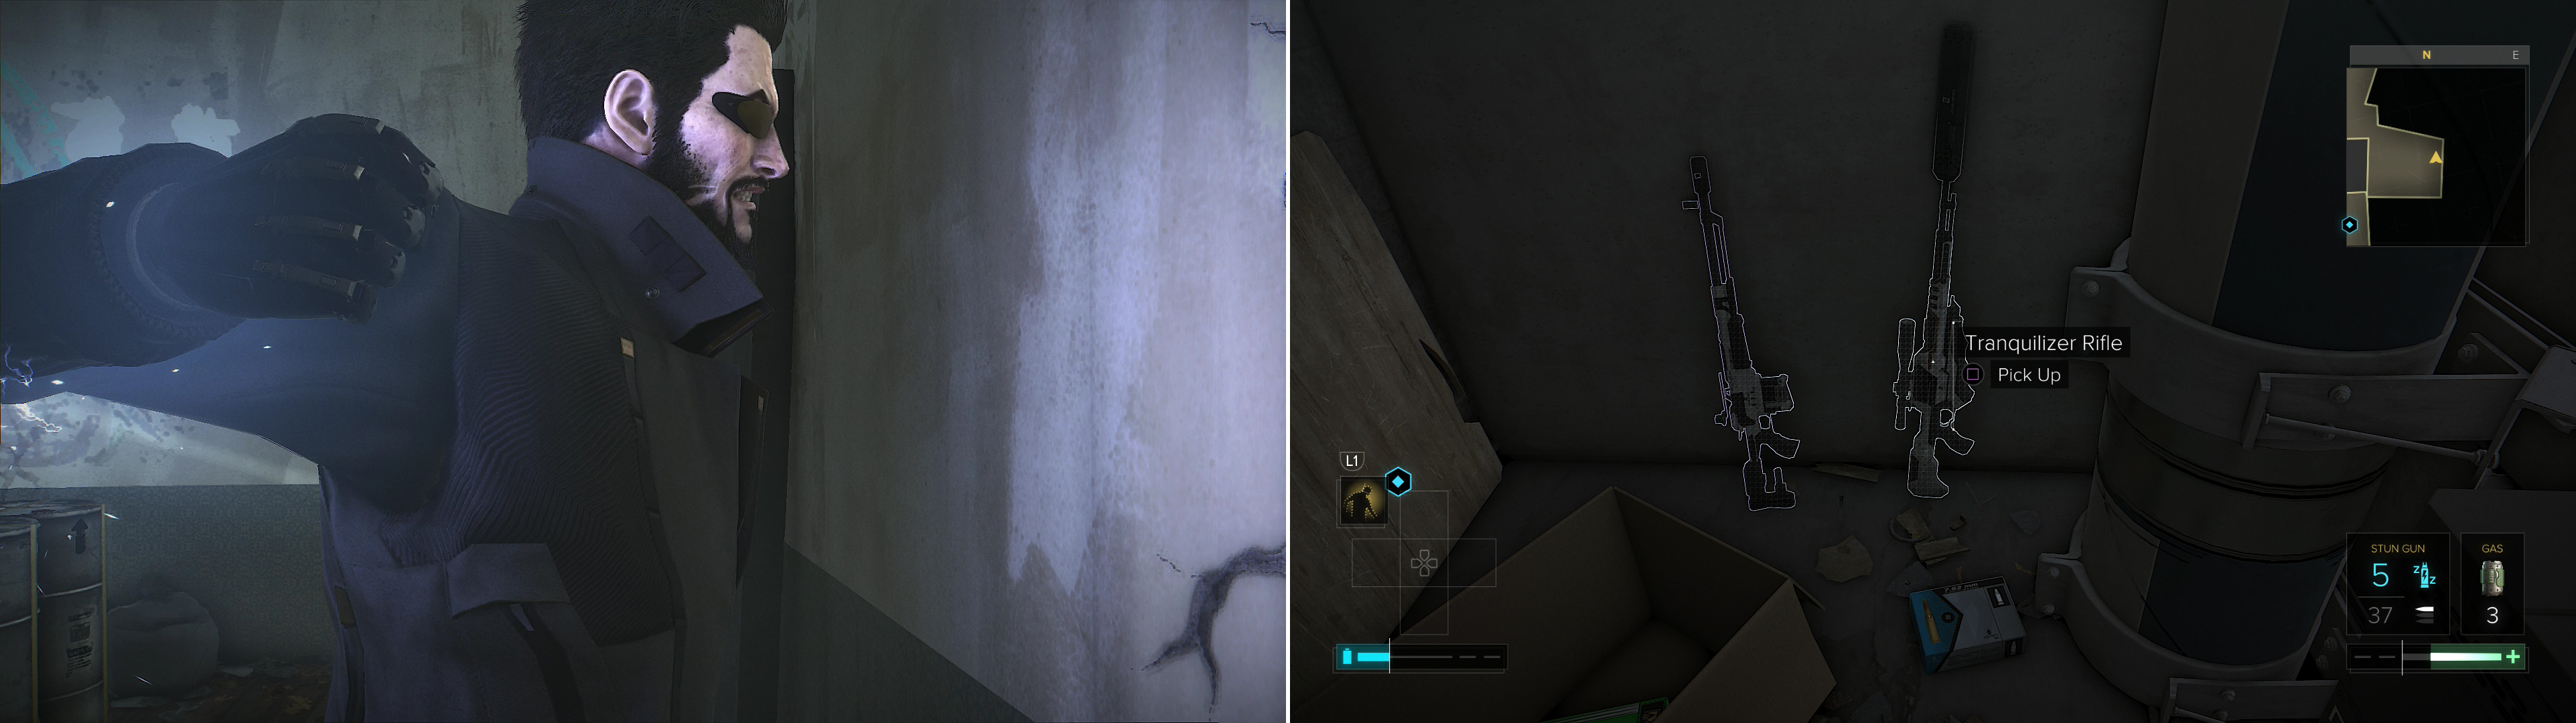 Use your reacquired augmentations to punch a hole in a wall (left) to find a Tranquilizer Rifle and other goodies (right).